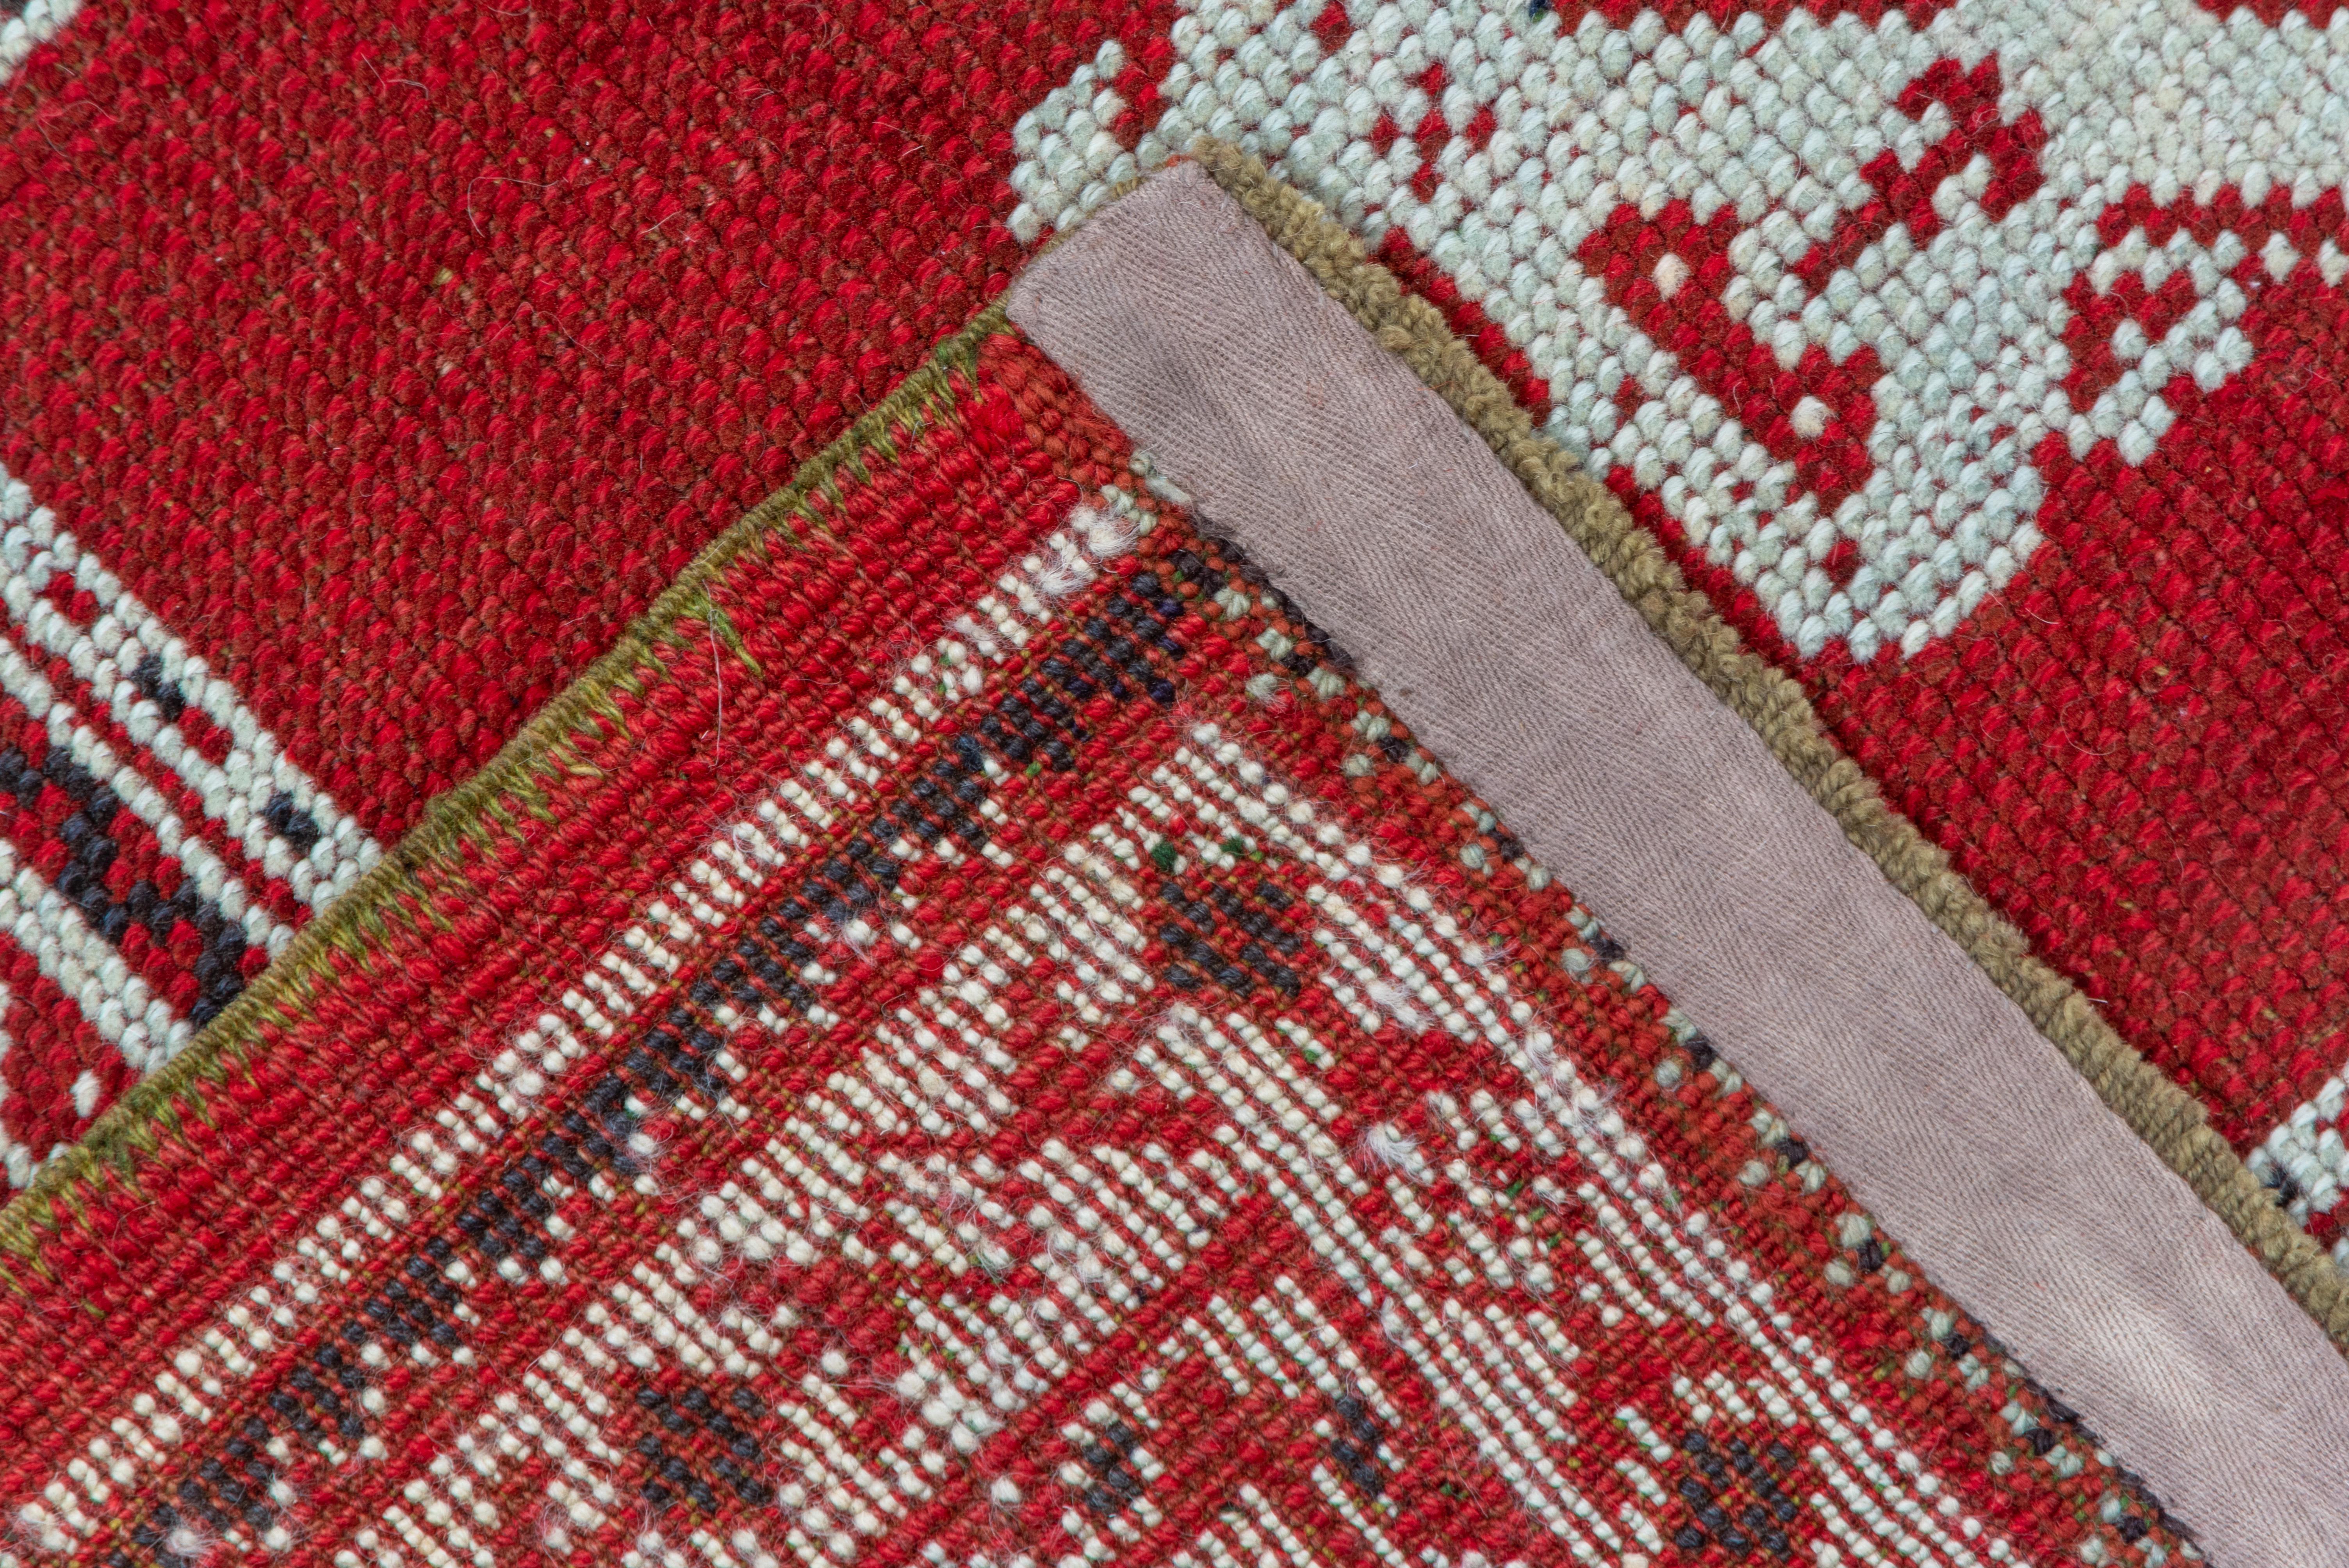 This 'Turkey Red' west Anatolian town carpet has a Yaprak and palmette pattern derived from 18th century archetypes. The red hyacinth and octagon rosette border also has earlier sources. Aqua blue and ivory are among the detail tones.